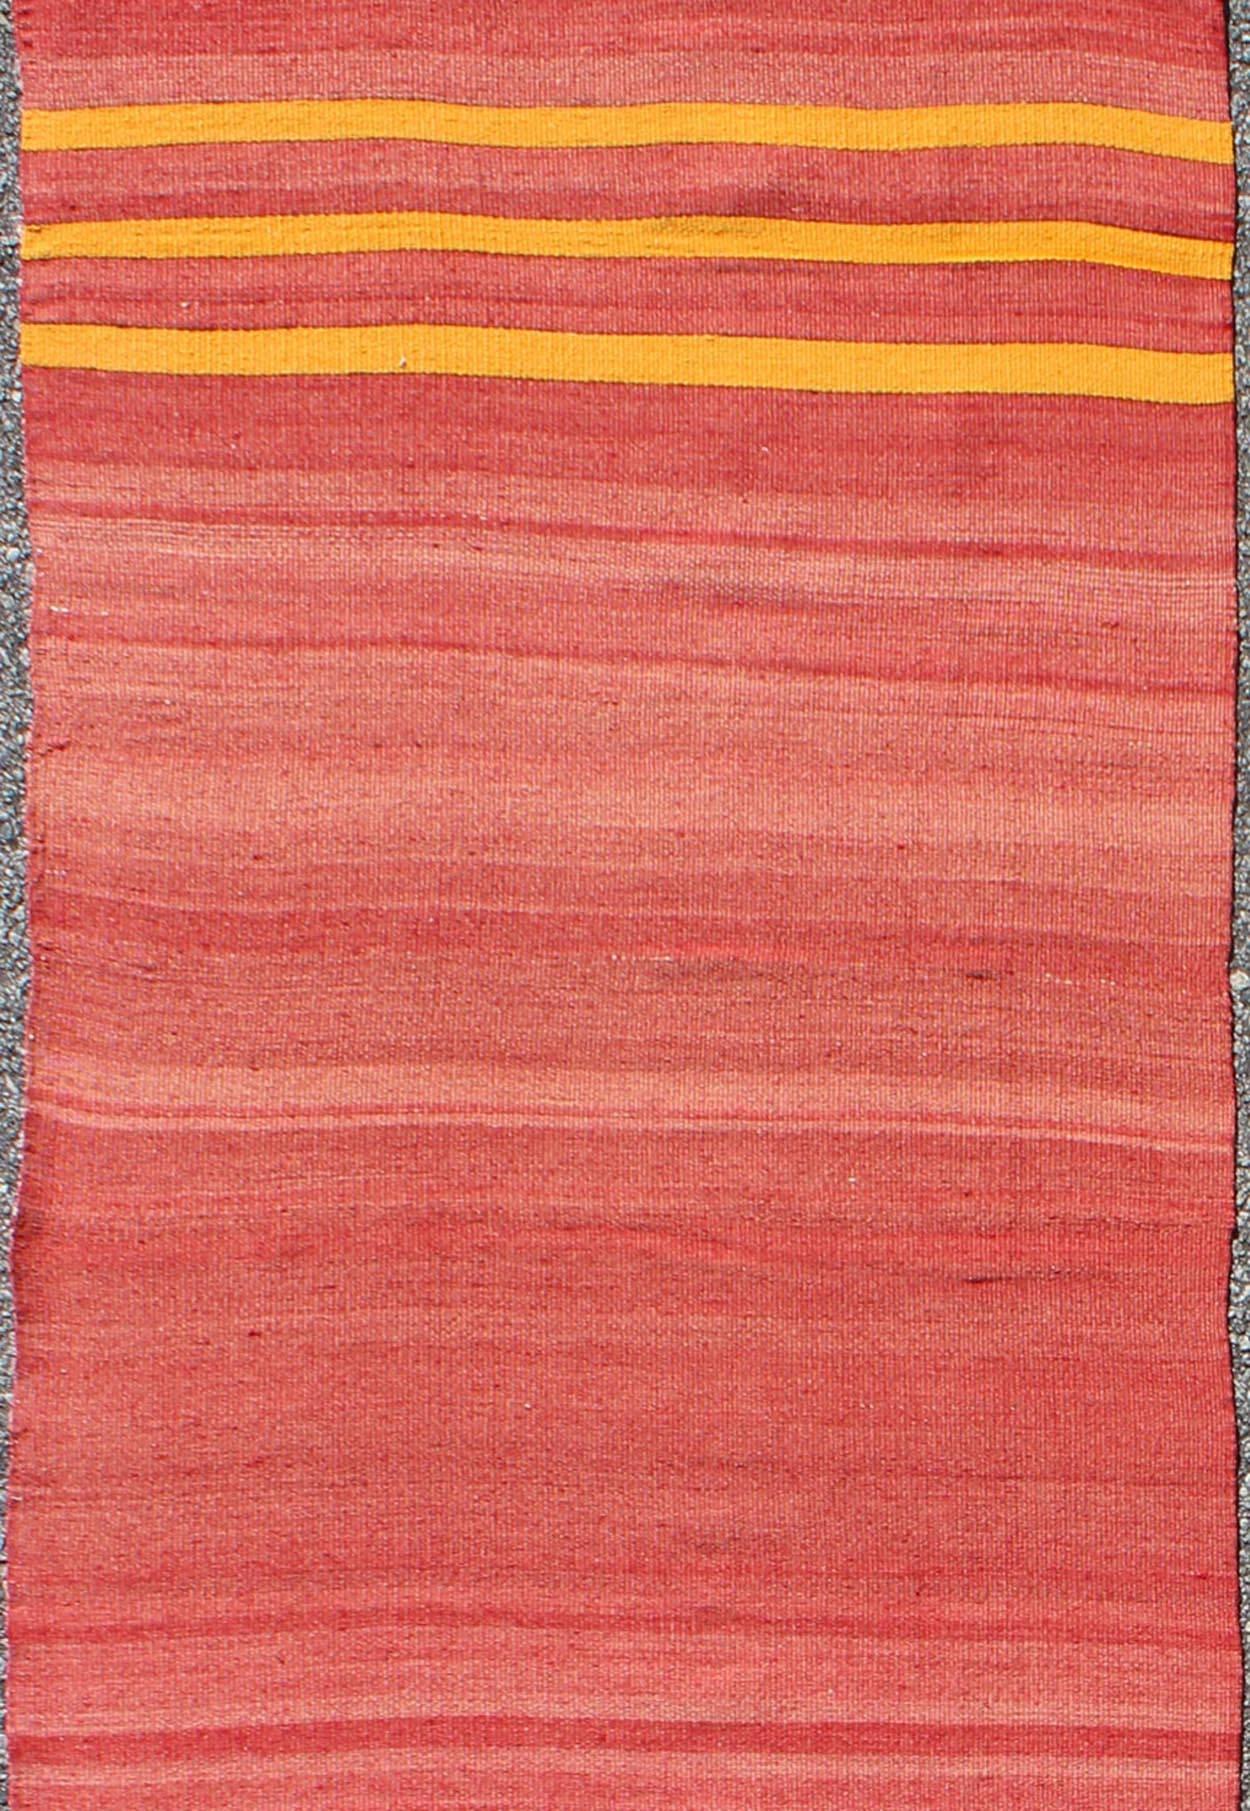 Red, Yellow, and Salmon Pink Striped Midcentury Vintage Turkish Kilim Rug In Excellent Condition For Sale In Atlanta, GA